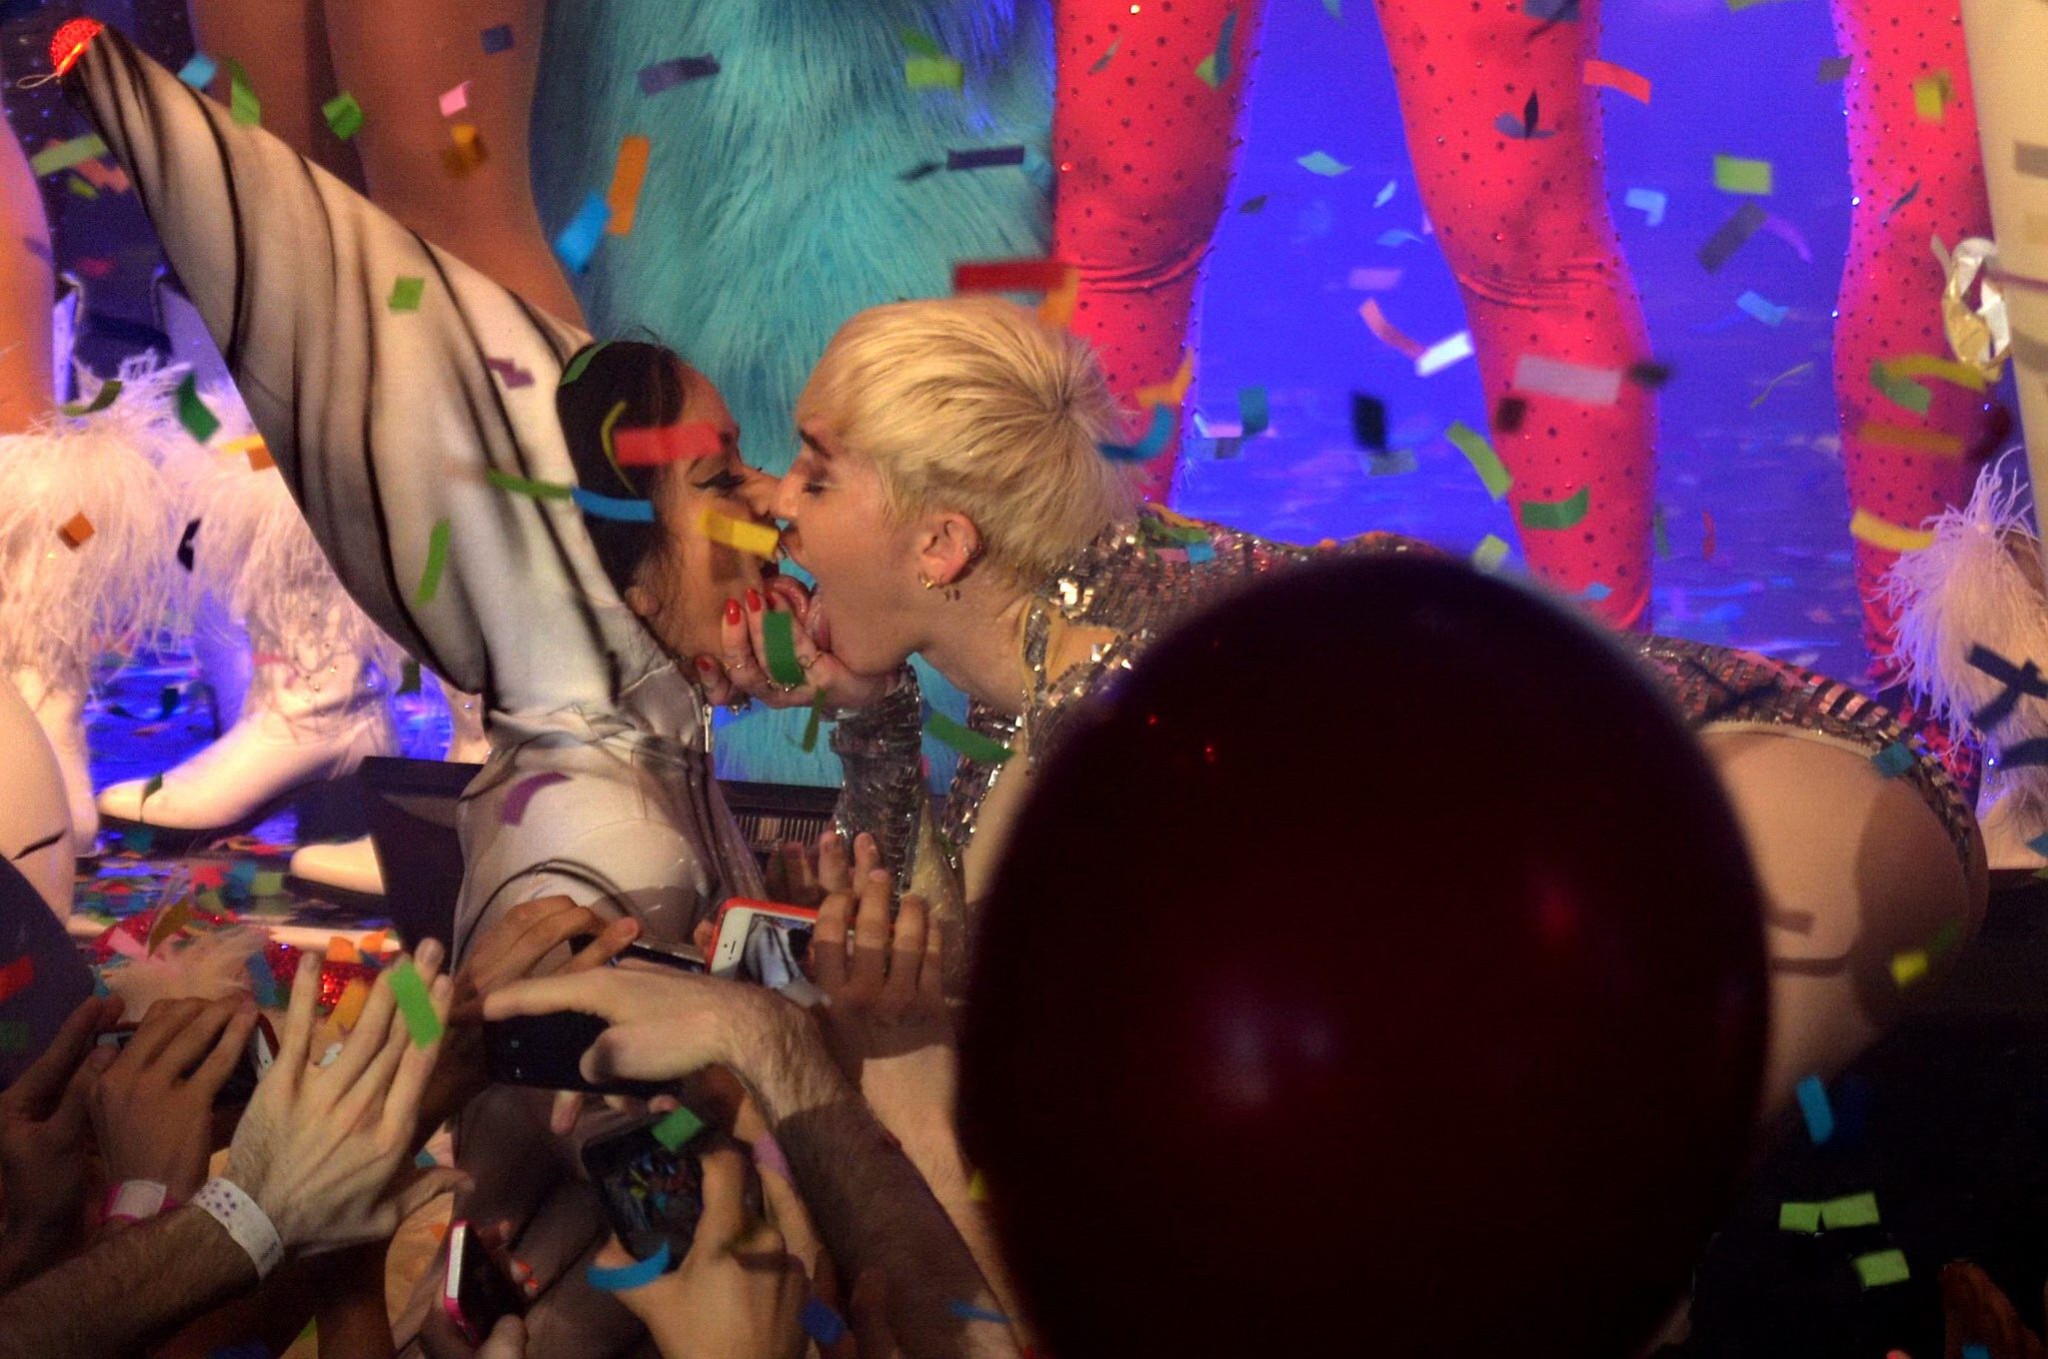 Miley Cyrus giving a blowjob to a blow up doll on stage at GAY Club in London #75197043